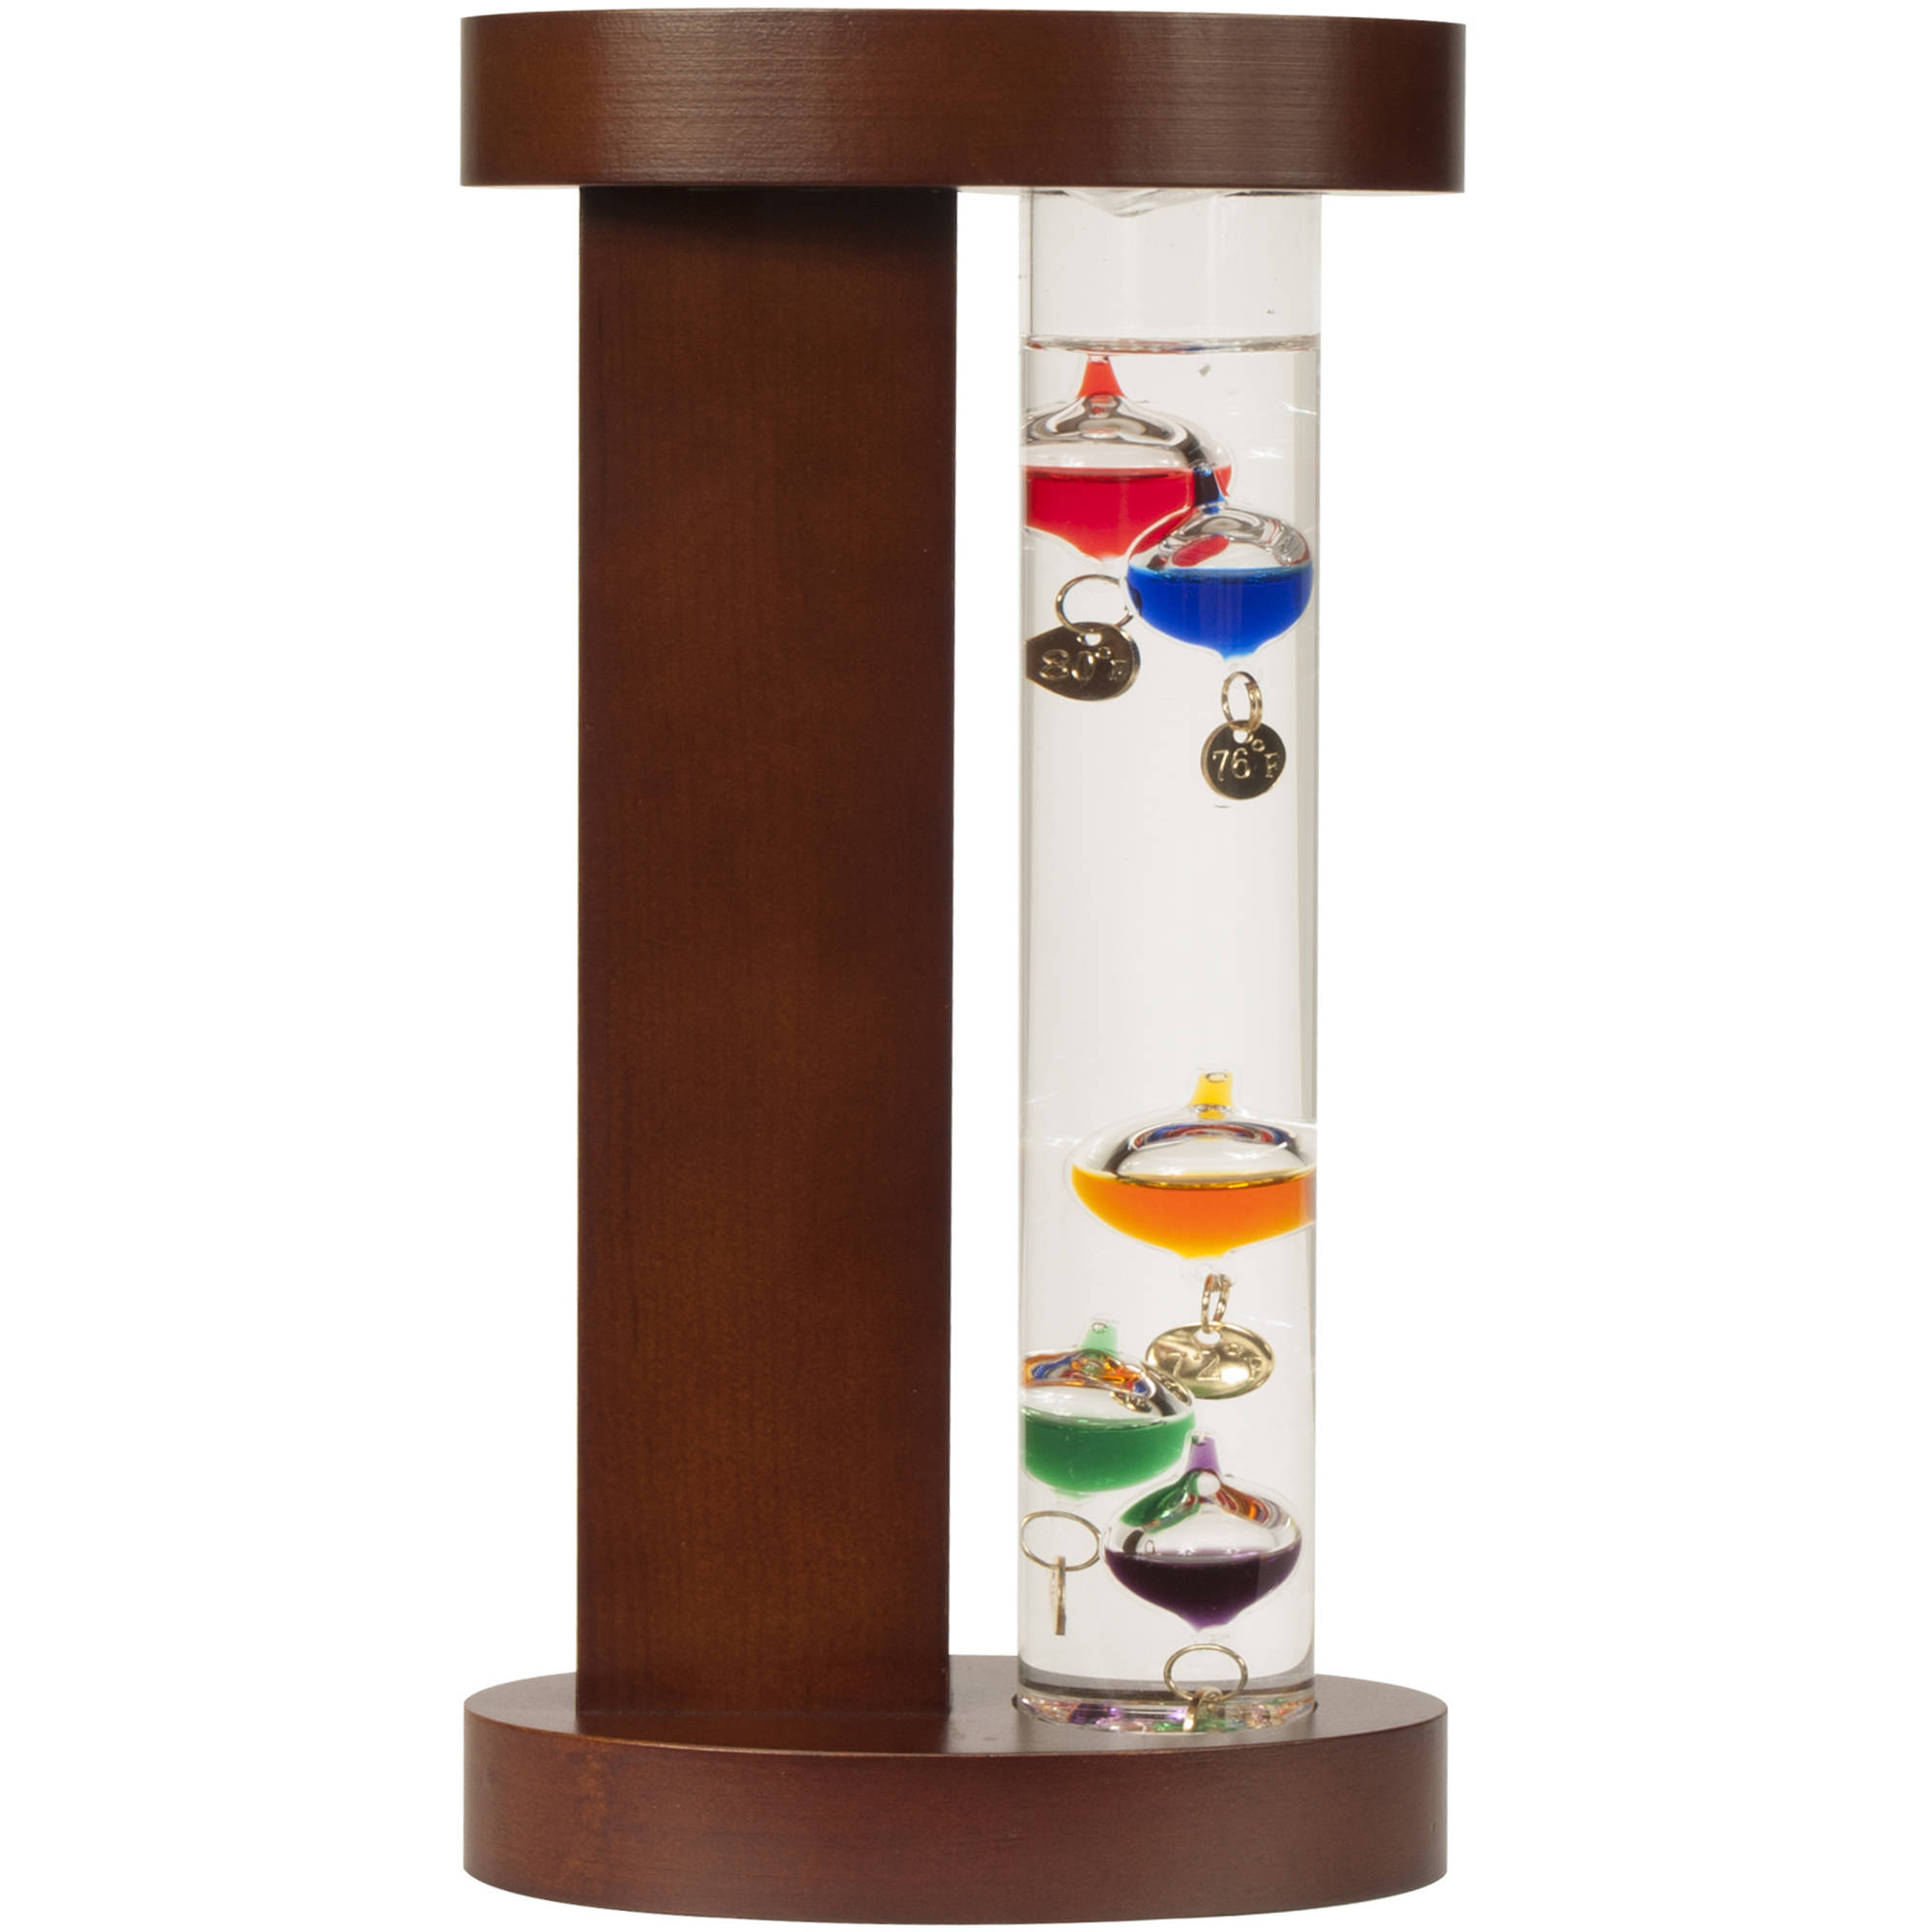 Galileo Thermometer with Wood Stand - image 1 of 2